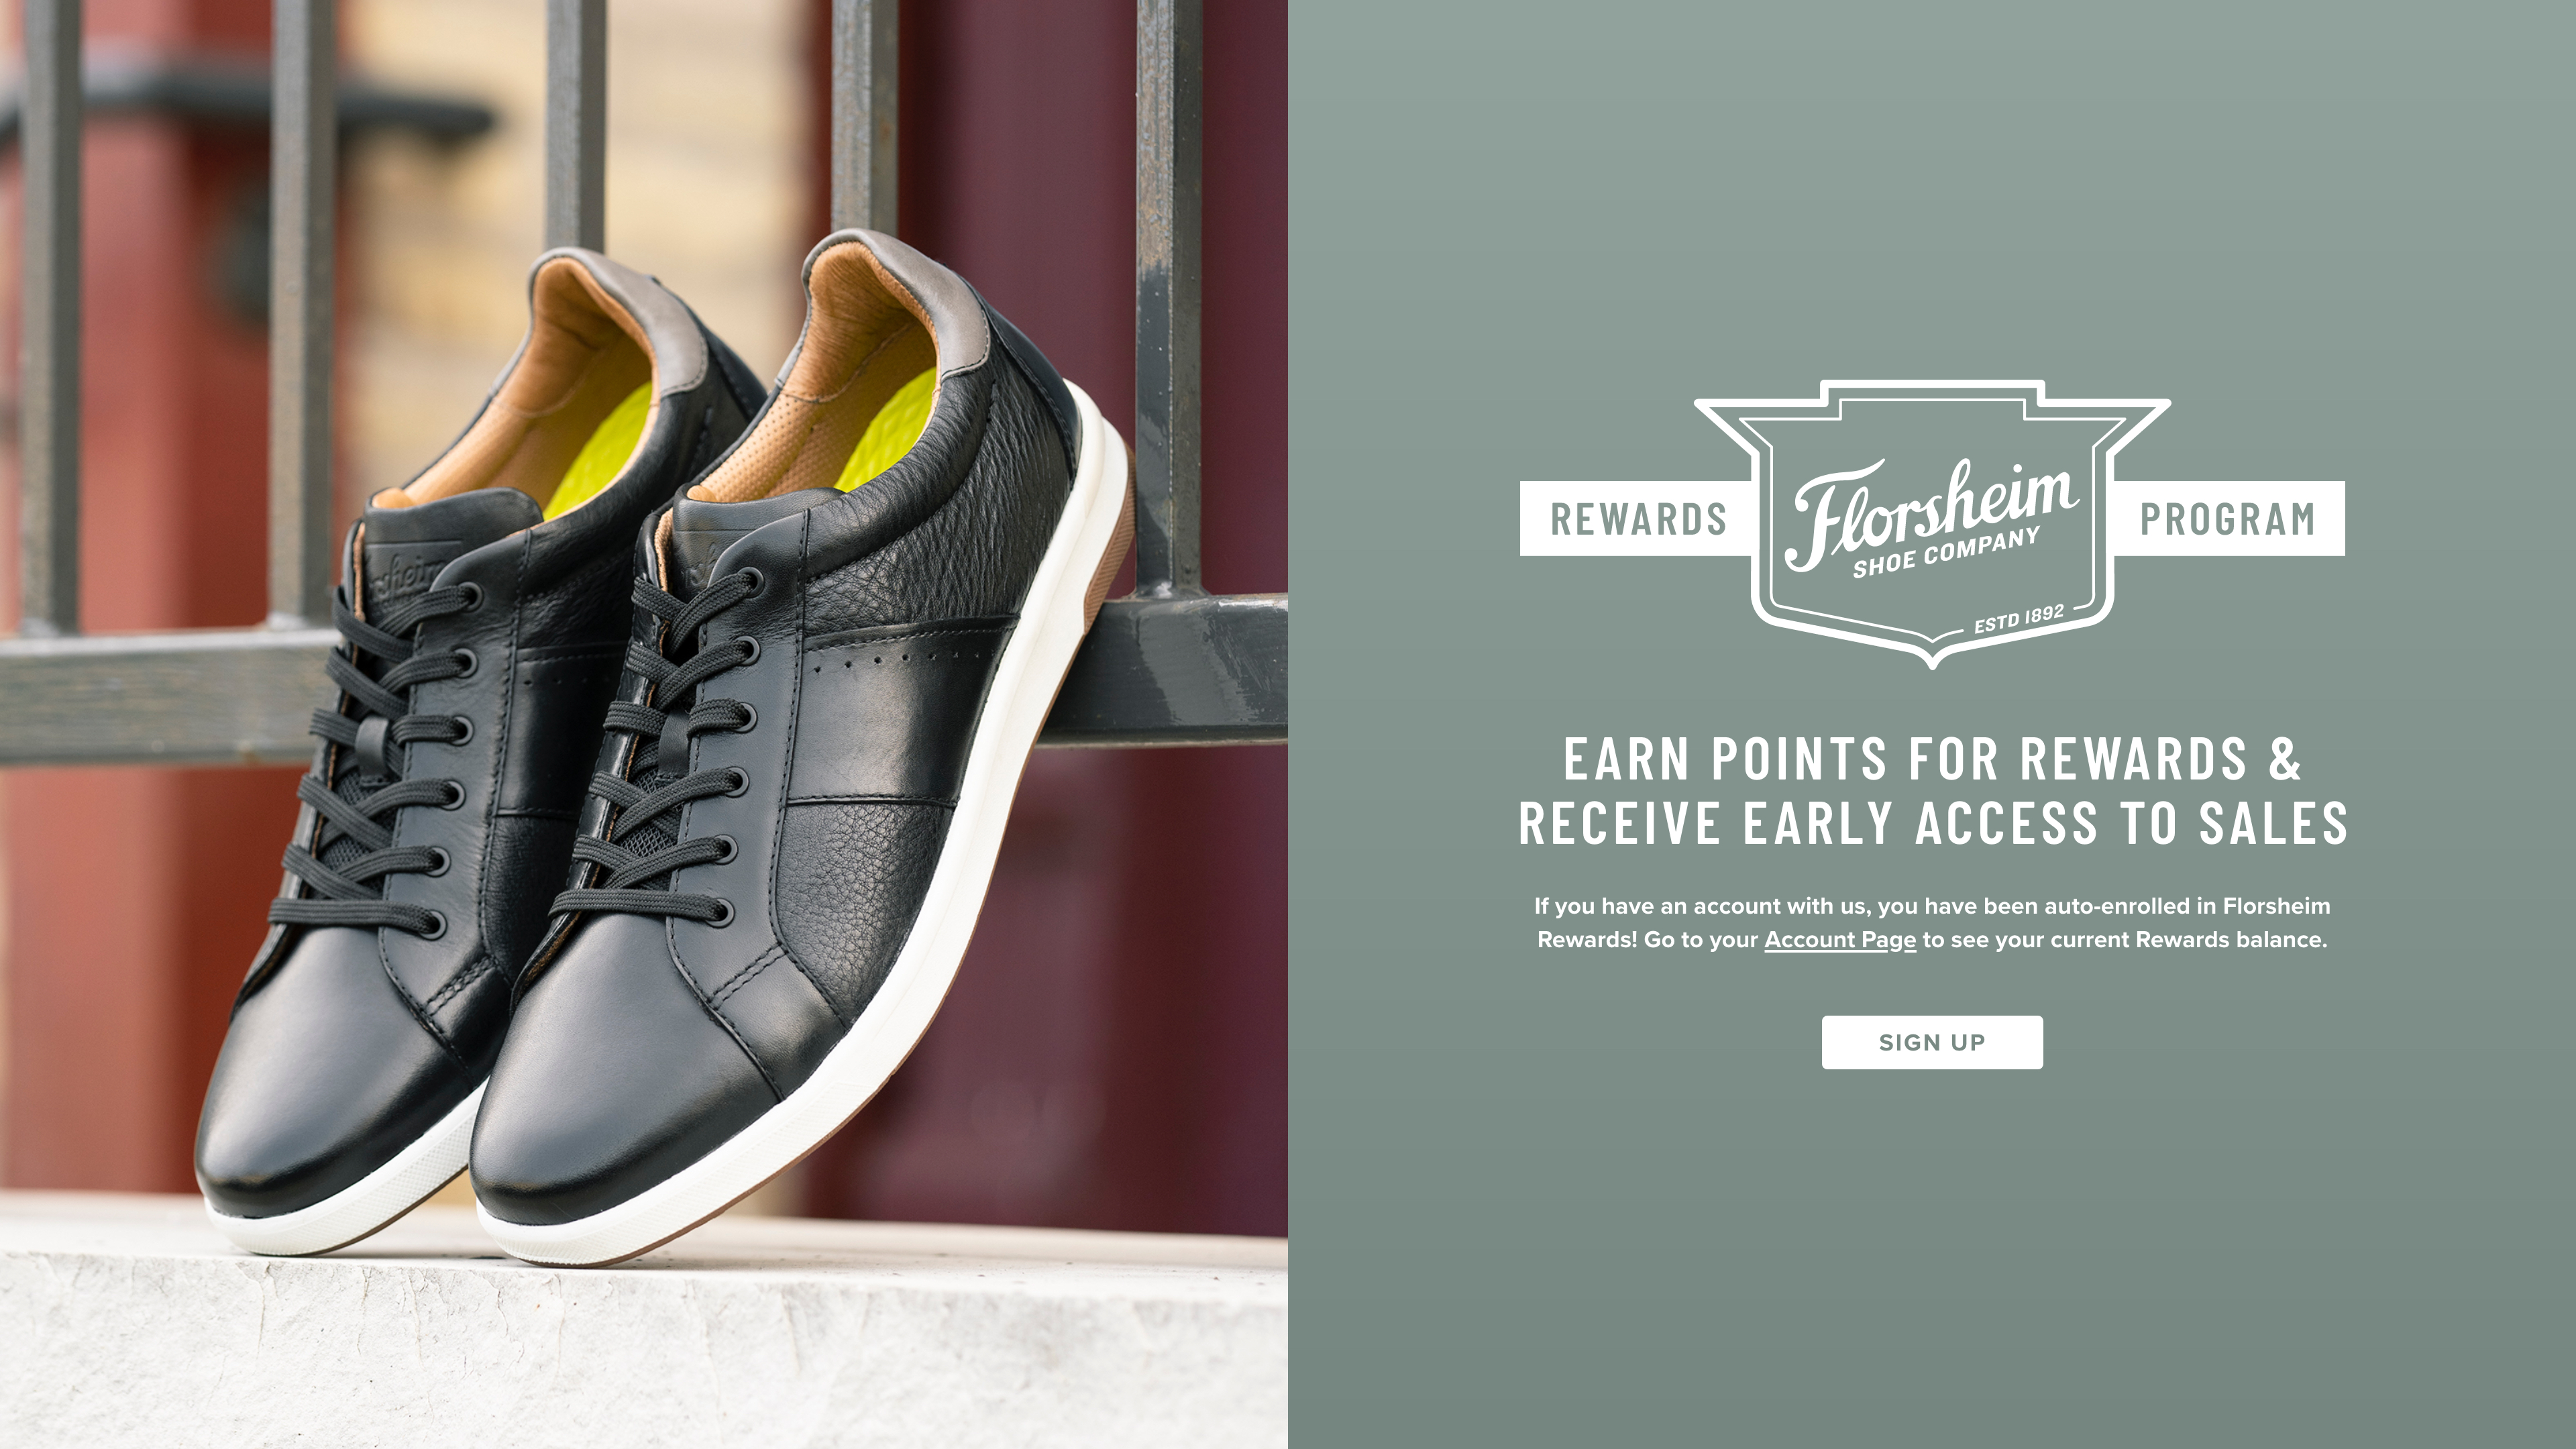 Click to sign up for Florsheim's rewards program. Earn points for rewards and receive early access to sales! Image features the Crossover sneaker in black leather. 